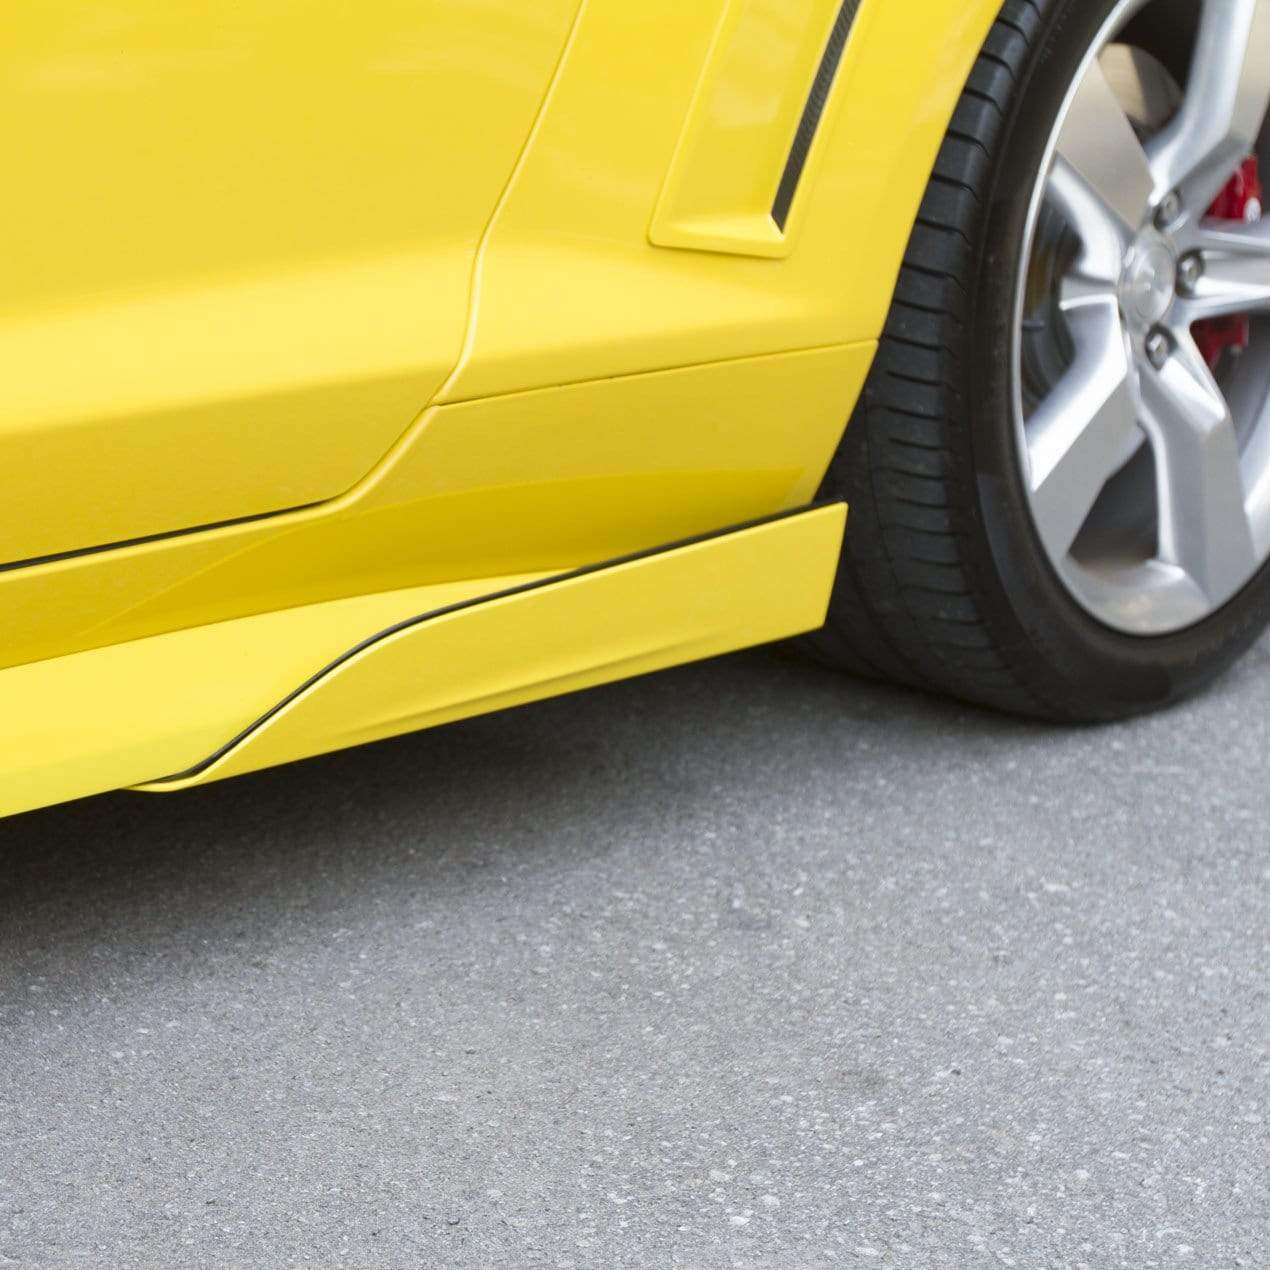 ACS Composite Camaro Side Rockers in Satin Black for 2014-2015 V6 models (46-4-005 SBK). Enhance your Camaro's style and performance with these aerodynamic side skirts.